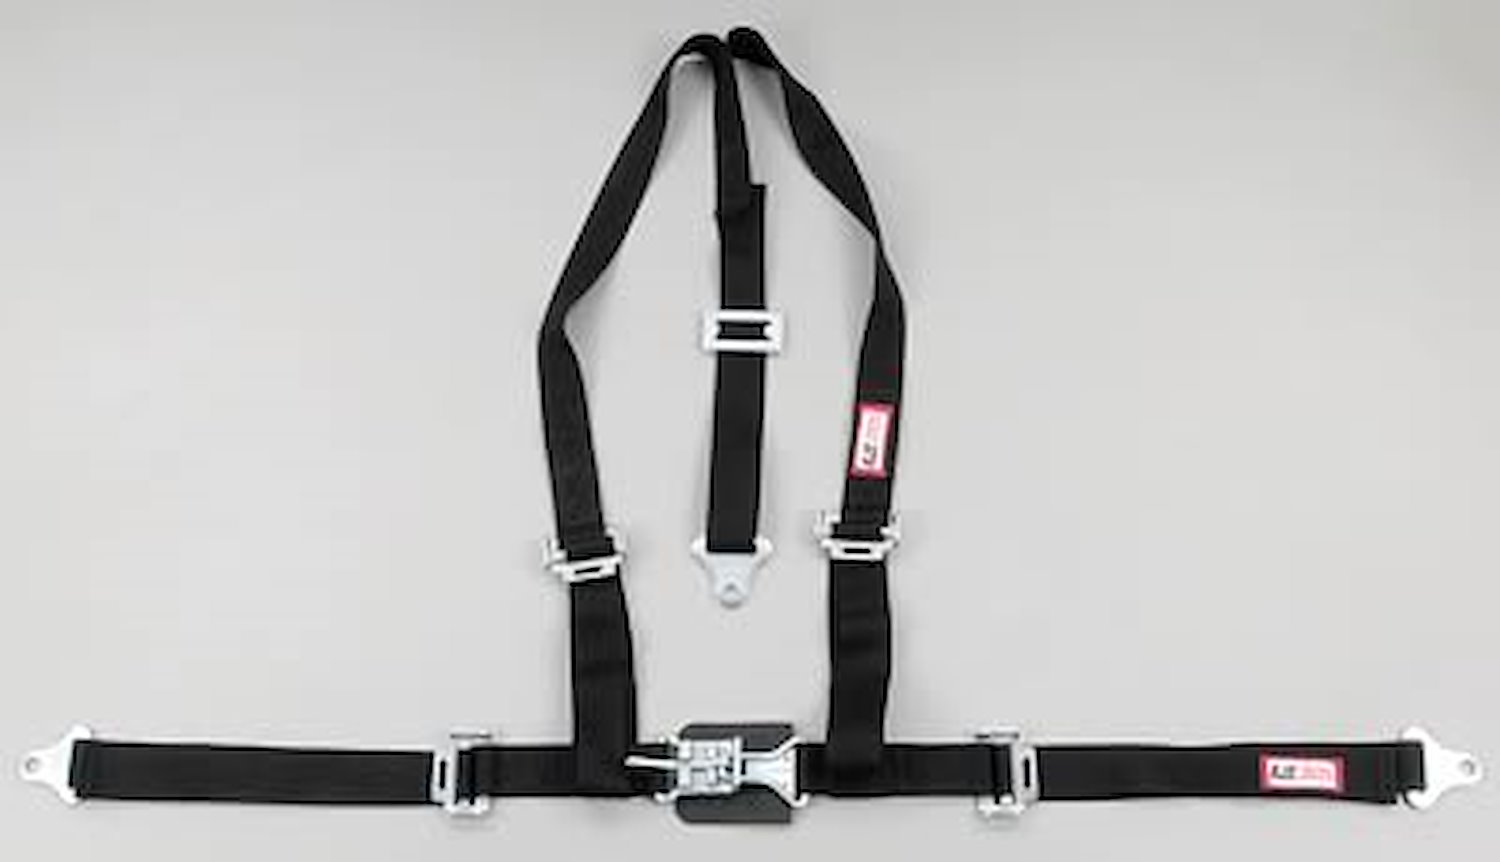 NON-SFI L&L HARNESS 3 PULL DOWN Lap Belt SNAP SEWN IN 2 S.H. Individual FLOOR Mount w/STERNUM STRAP WRAP/BOLT YELLOW